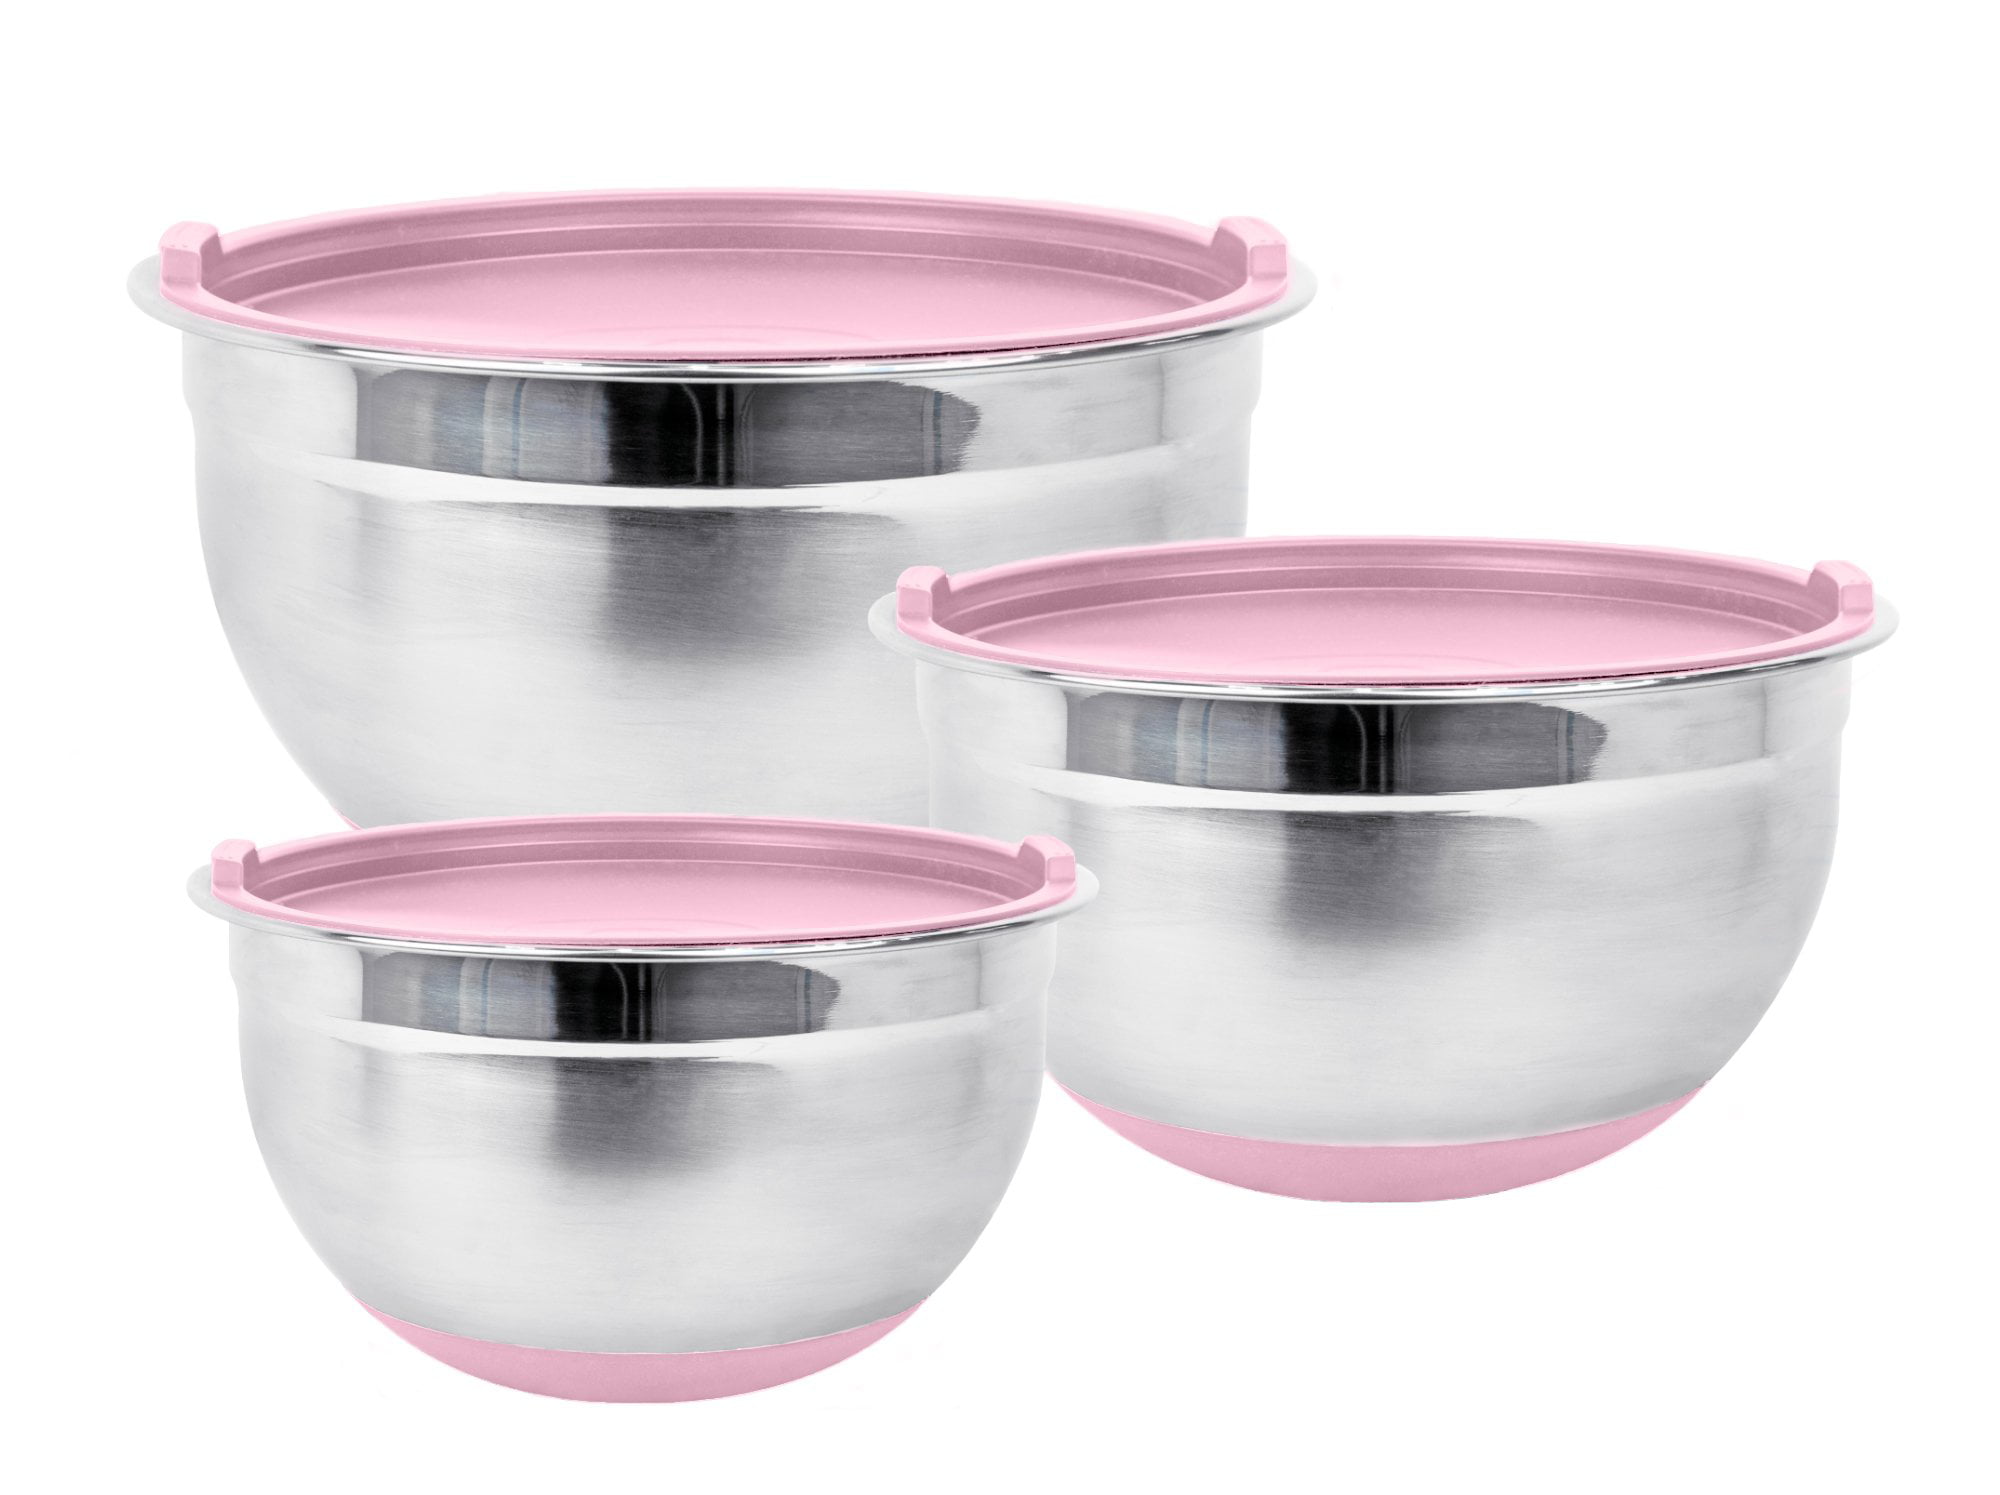 Blue or Red SYNCHKG064279 Stainless Steel Mixing Bowls with Lids Set of 3 by Fitzroy and Fox 